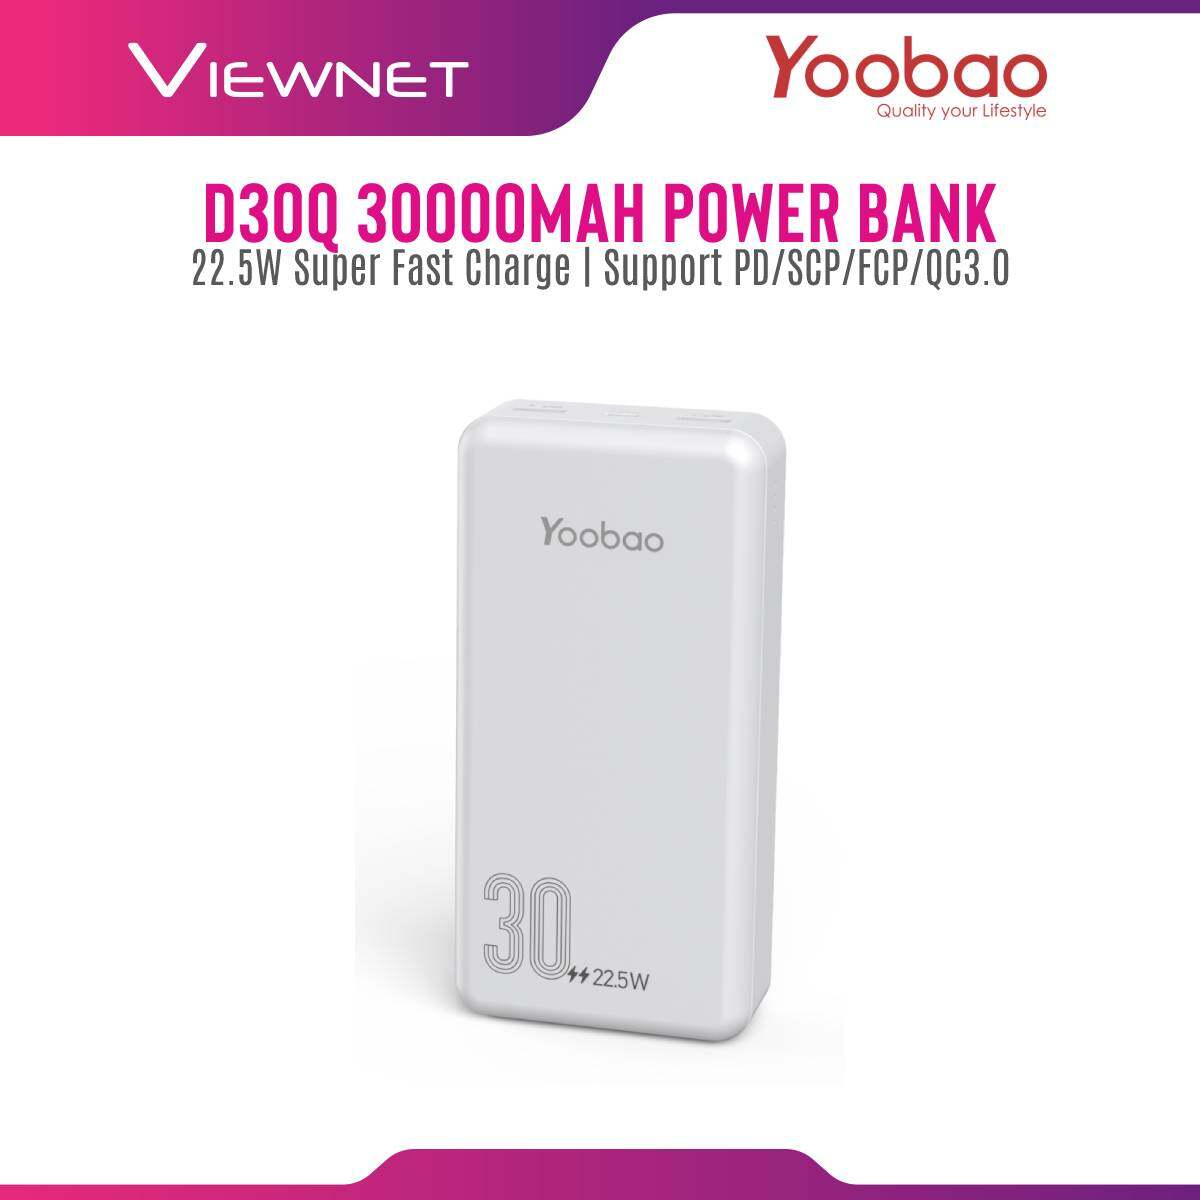 Yoobao D30Q 30000mAh 22.5W Power Bank Support Huawei Super Fast Charge /PD/FCP/QC3.0